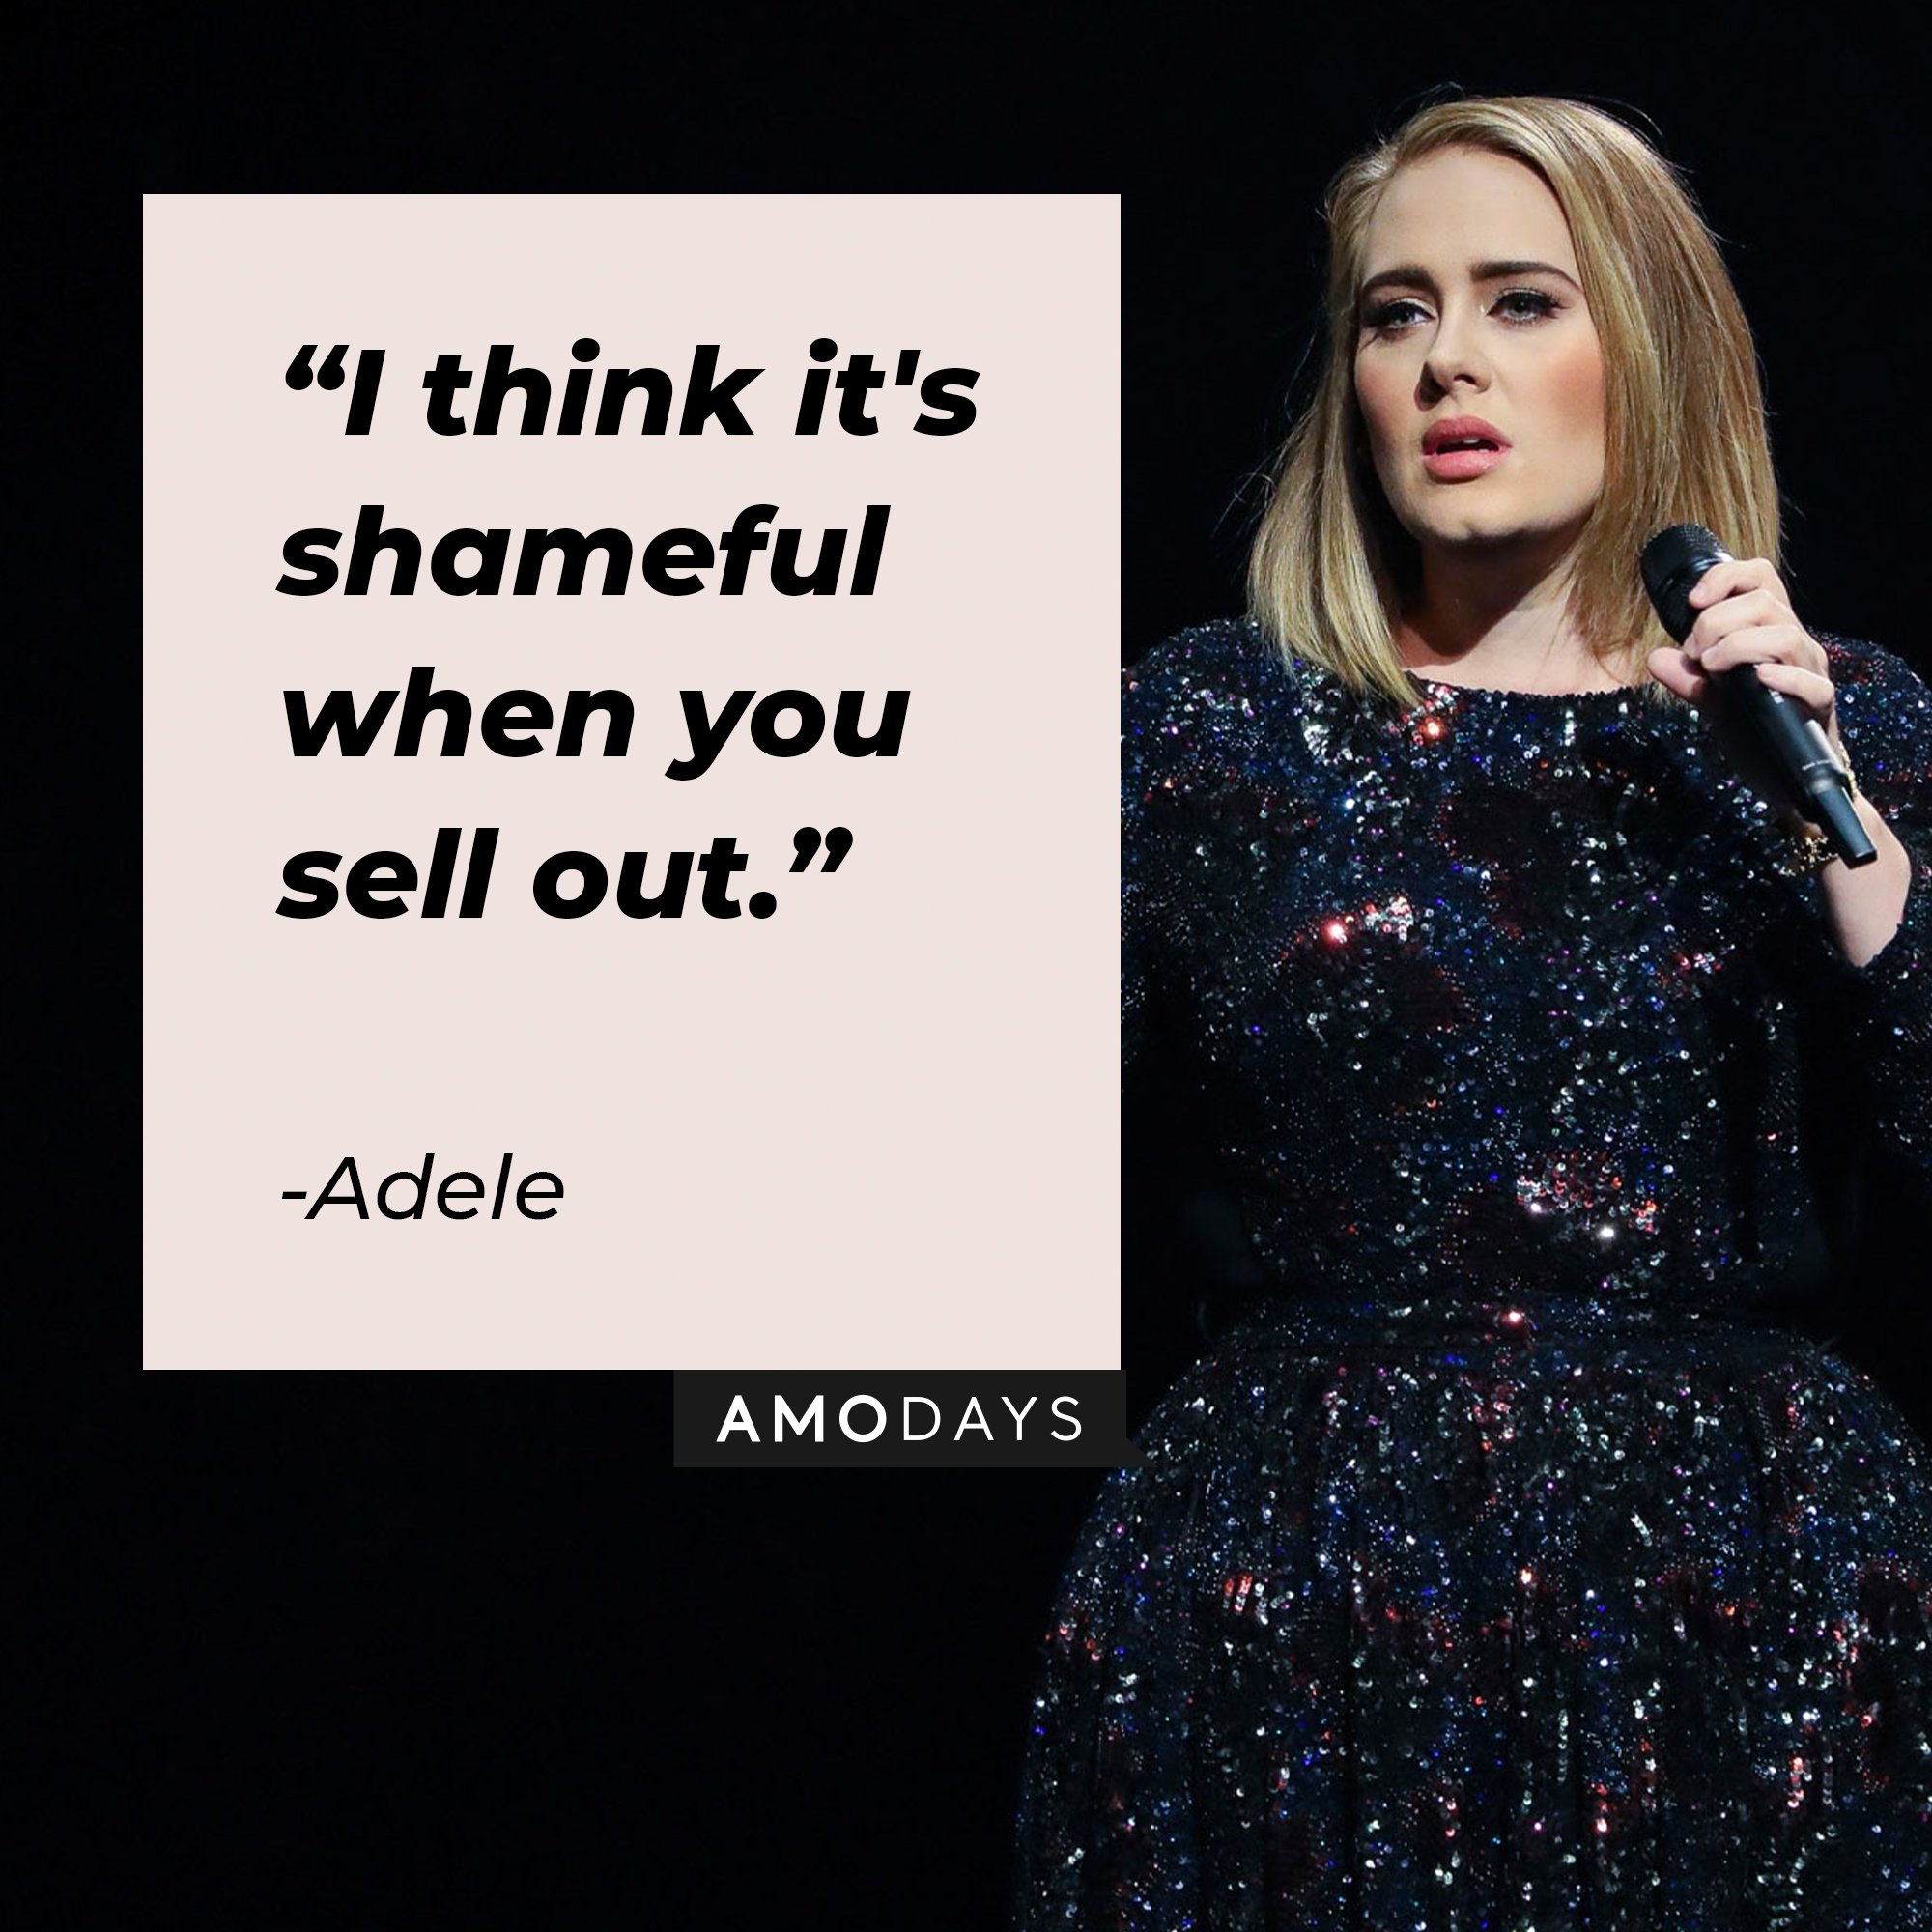 Adele’s quote: "I think it's shameful when you sell out." |  Image: AmoDays